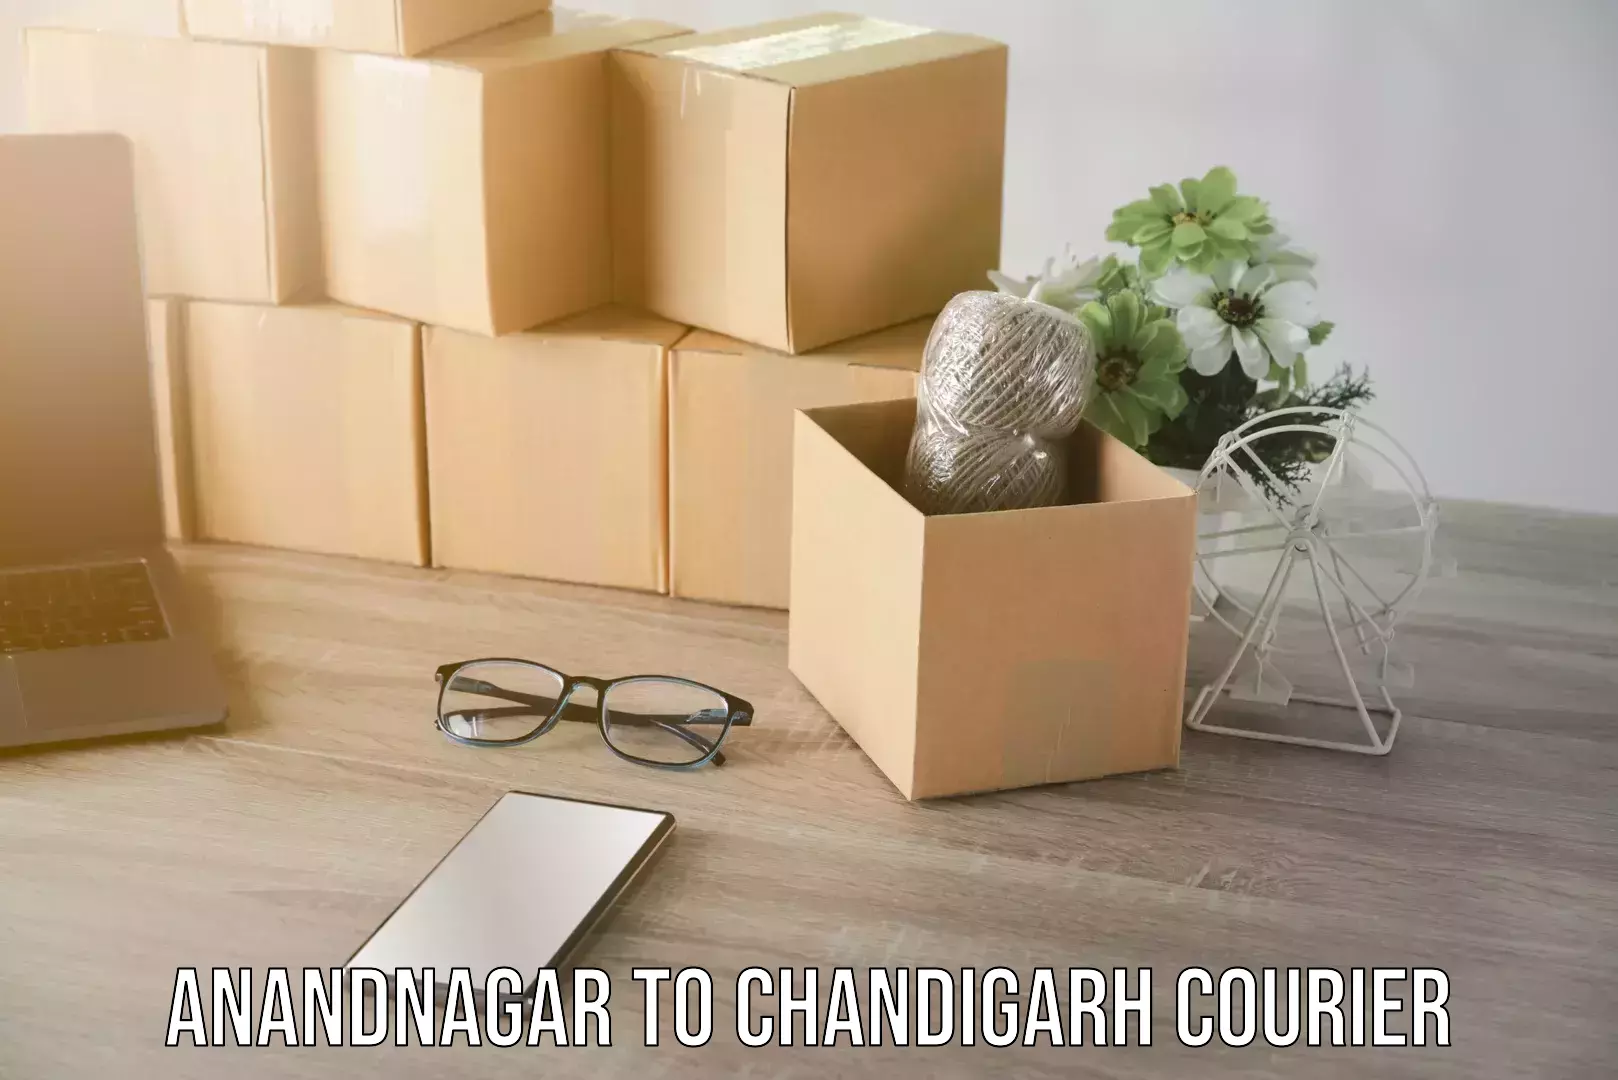 Global shipping solutions Anandnagar to Chandigarh